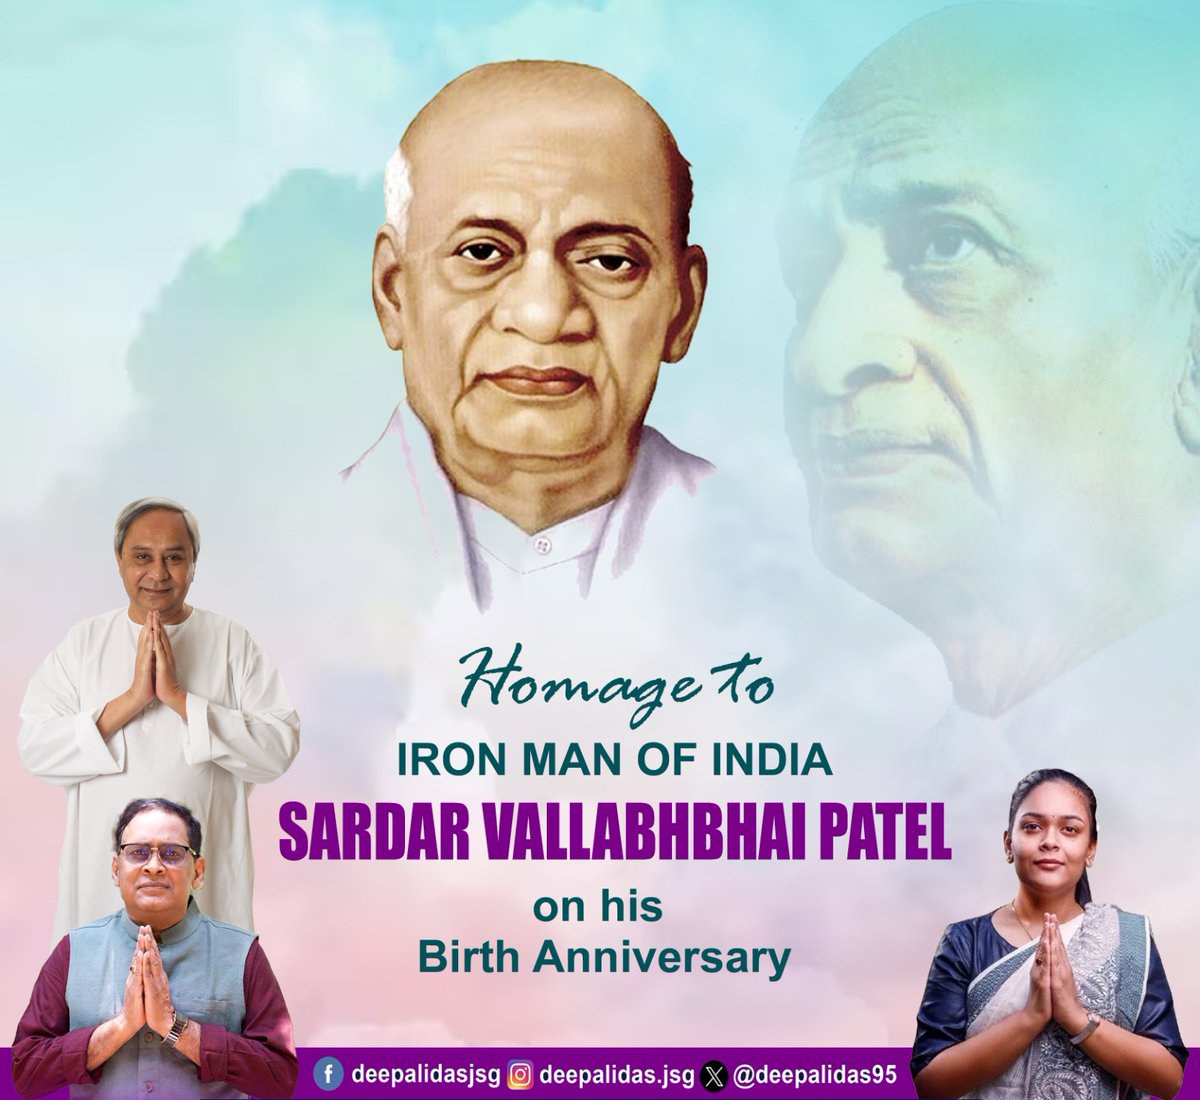 Tribute to the Iron Man Sardar Vallabhbhai Patel on his birth anniversary. There's a lot of strength in unity. So as Indians' we should work together to build a strong nation.
#SardarVallabhbhaiPatel 
#EktaDiwas 
#jharsuguda